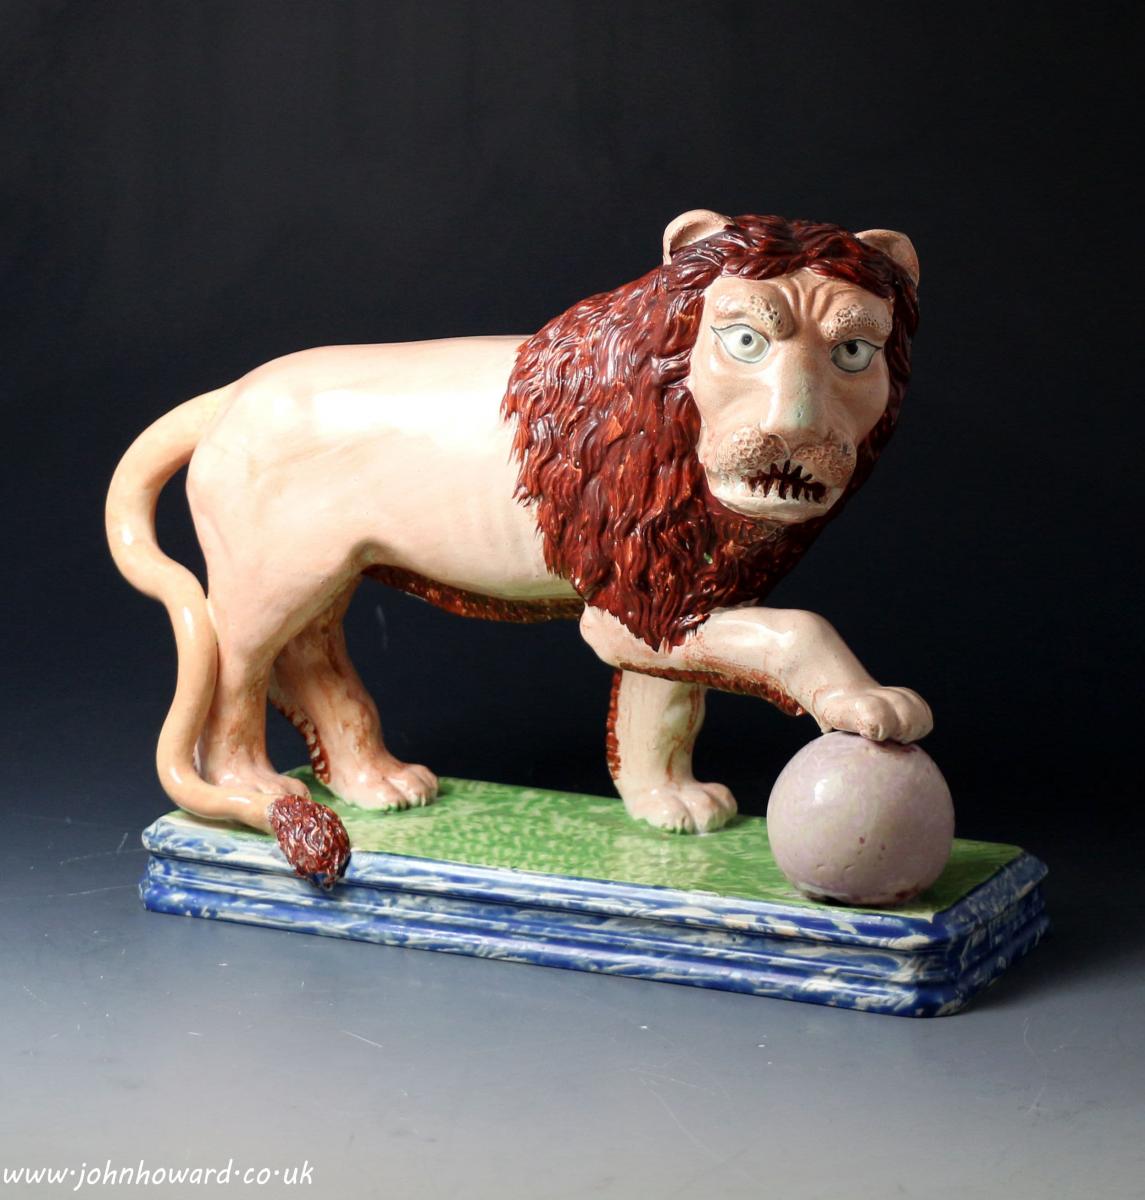 Antique Staffordshire pearlware figure of an angry lion standing on base early 19th century